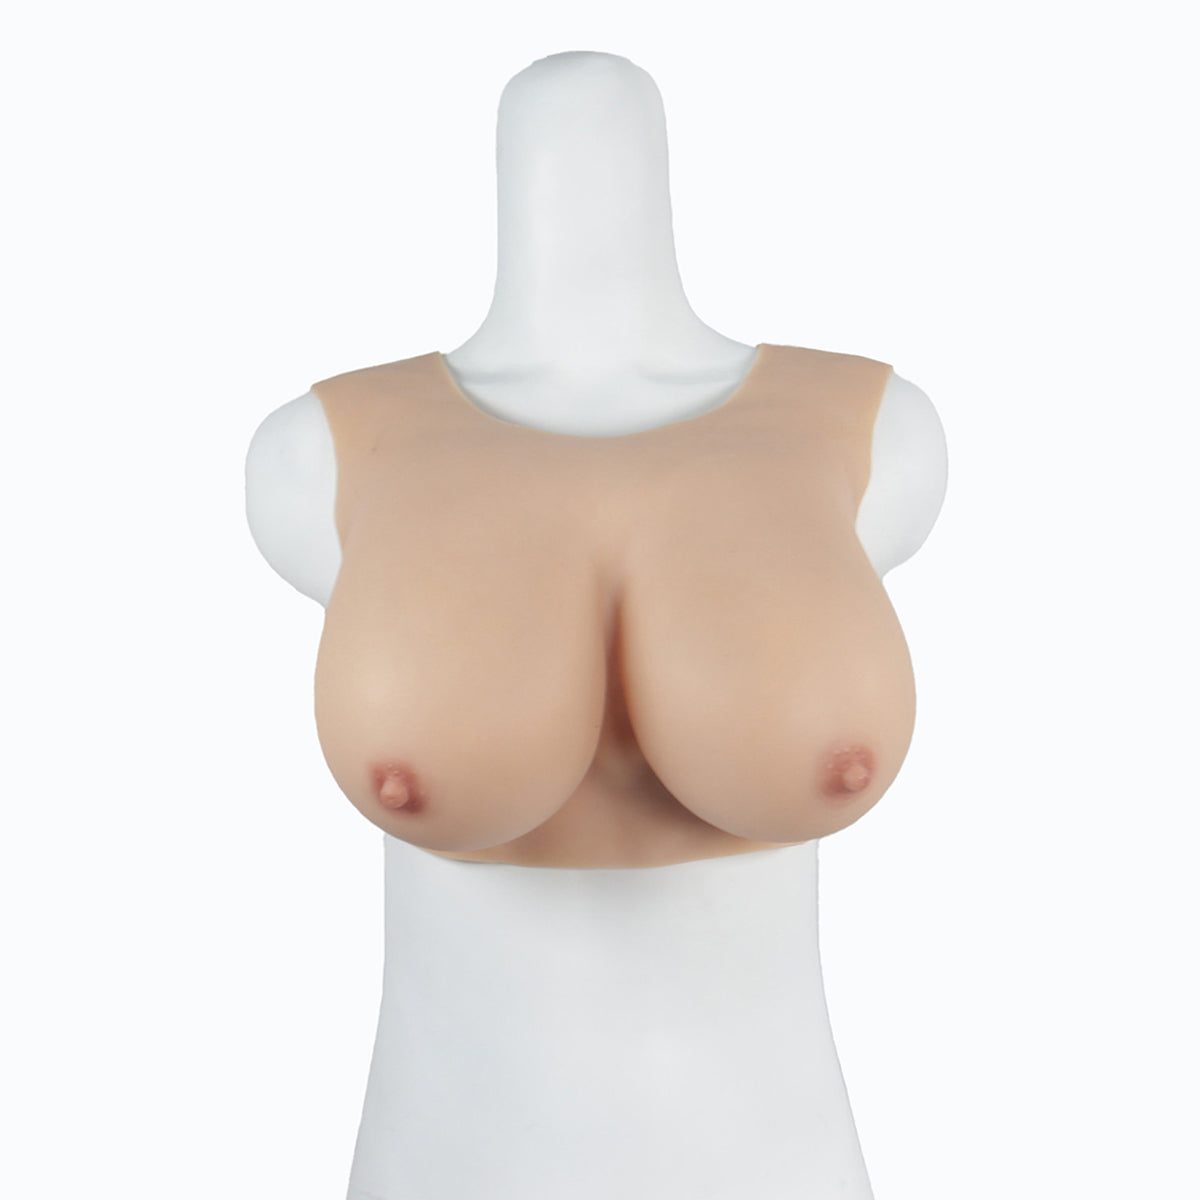 Breast forms